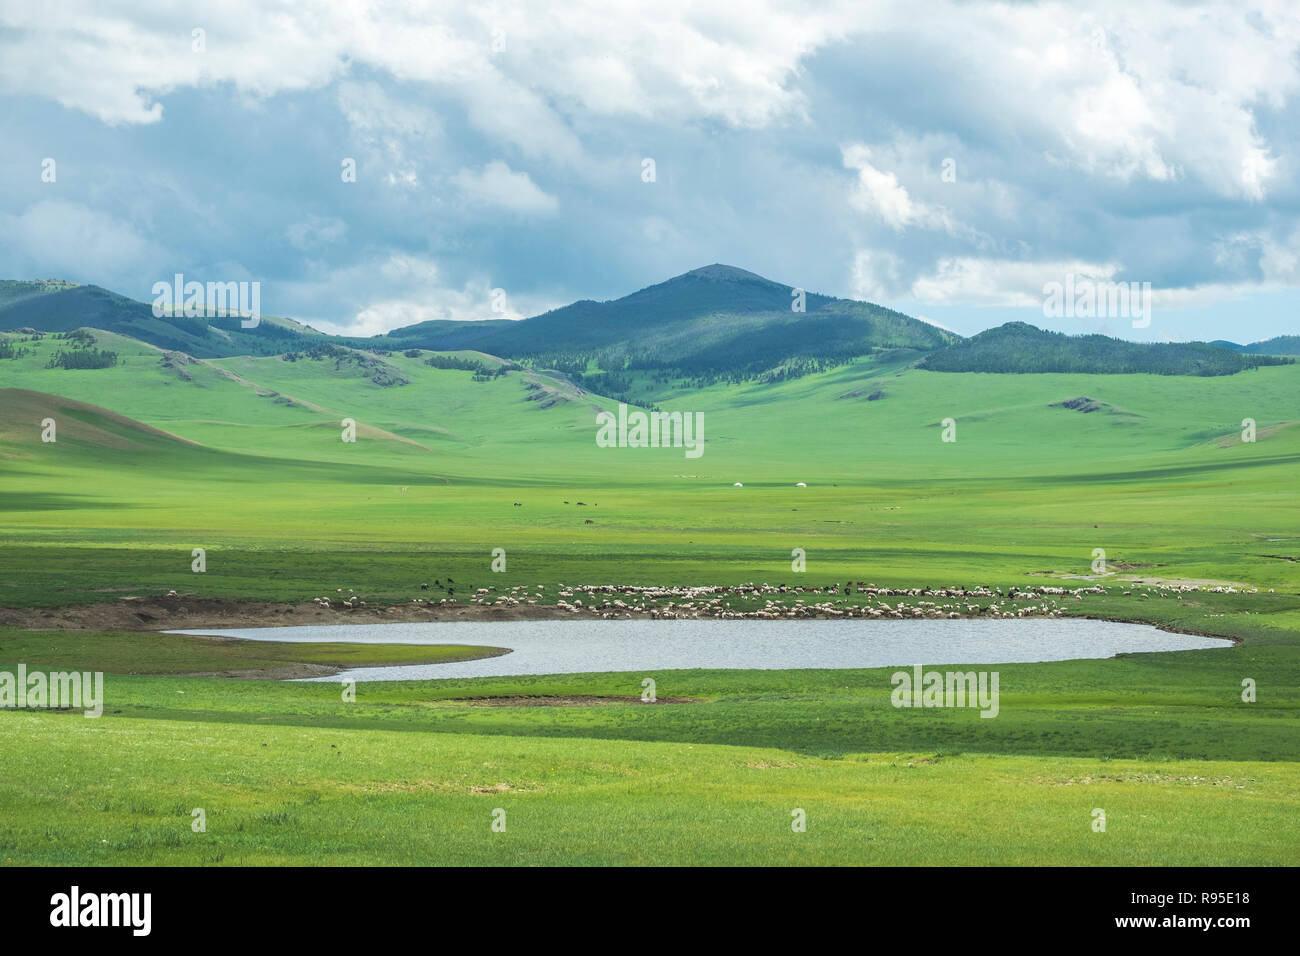 The beautiful steppes of Mongolia in the summer. Livestock’s of the Mongolian nomads are seen grazing and drinking at a lake. Stock Photo